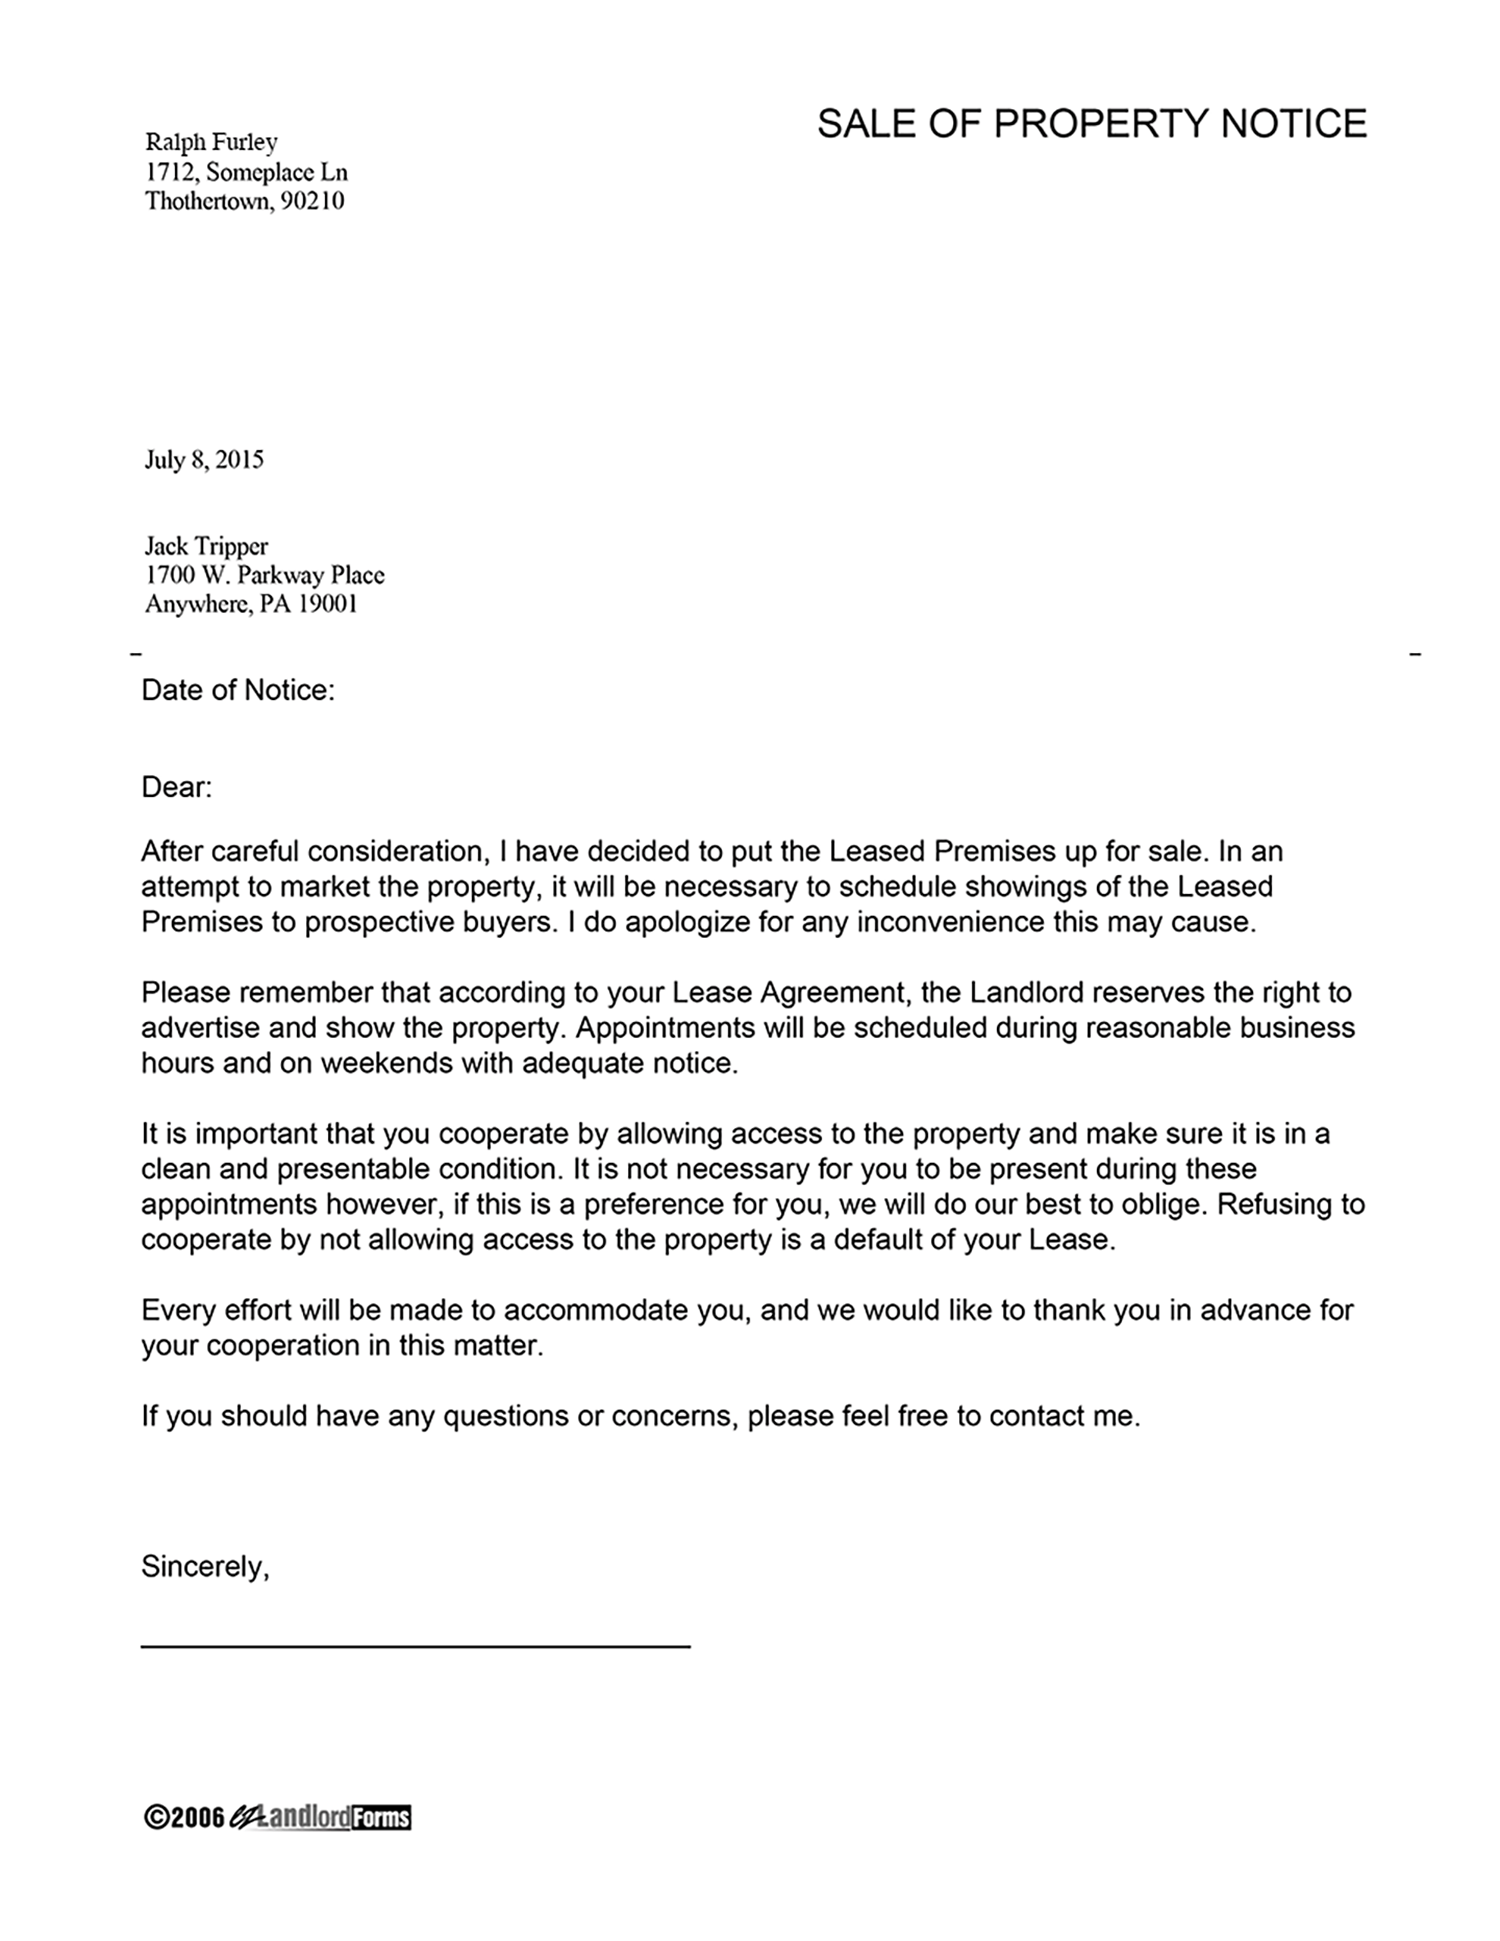 Letter From Landlord To Tenant from www.ezlandlordforms.com